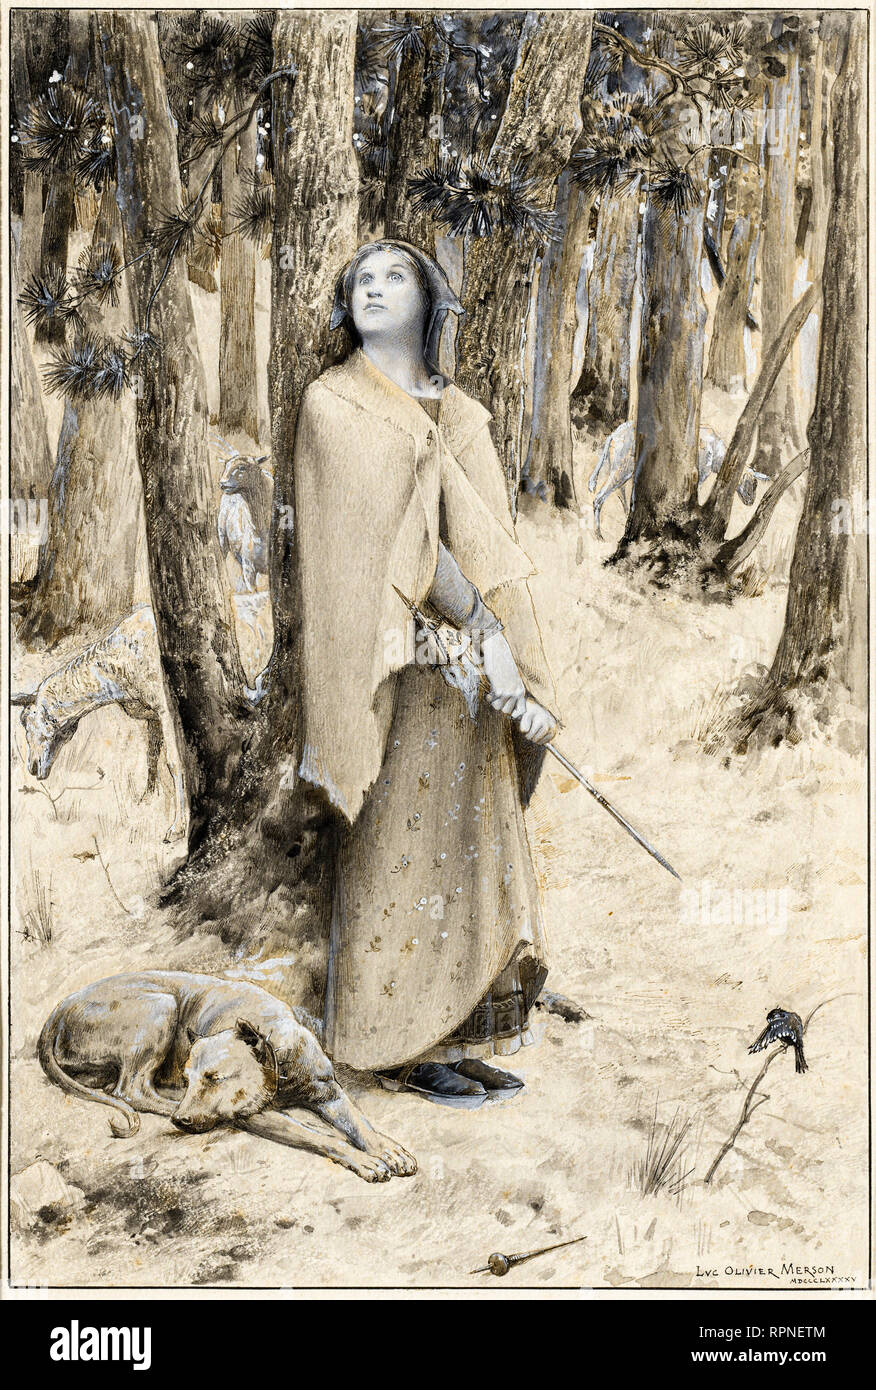 Luc Olivier Merson, Joan of Arc Hearing the Voices, 1895, painting Stock Photo